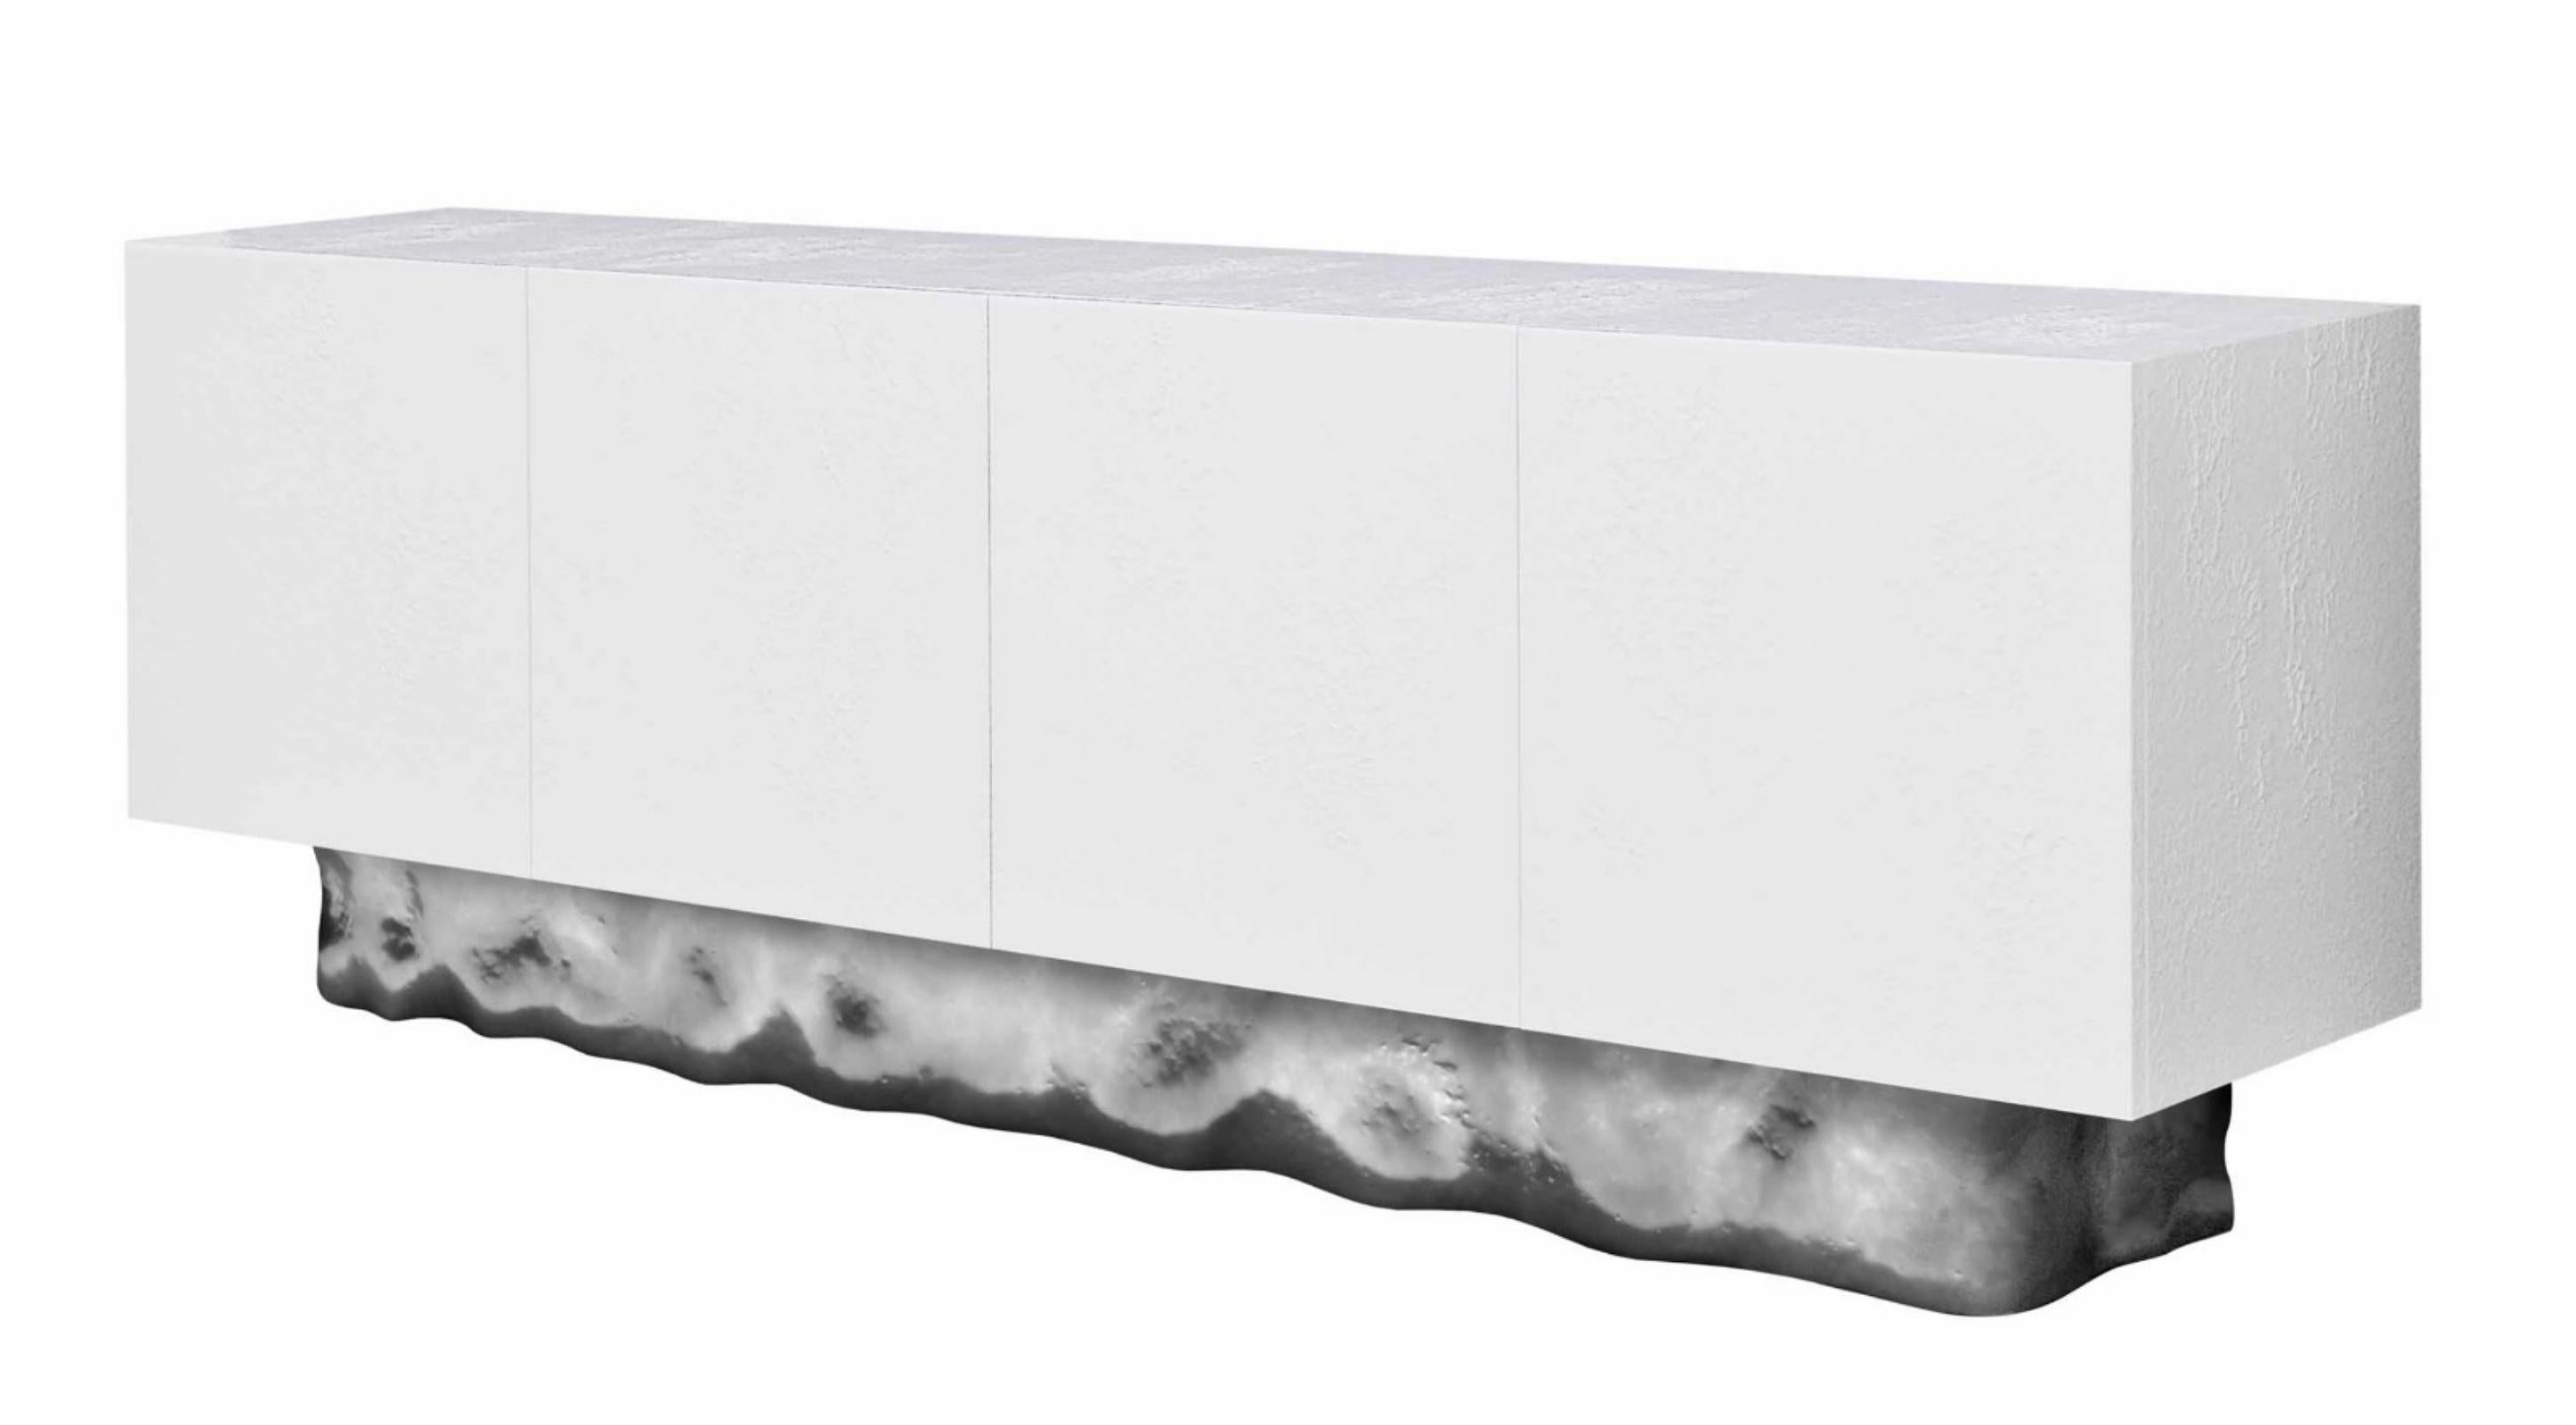 Sideboard

General Information

Dimensions (cm): 230 x 47 x 80
Dimensions (in): 90.5 x 18.5 x 31.5

Materials and Colors

Structure: Wood reinforced with fiberglass, textured and finished in white high gloss;
Base: Resin reinforced with fiberglass,